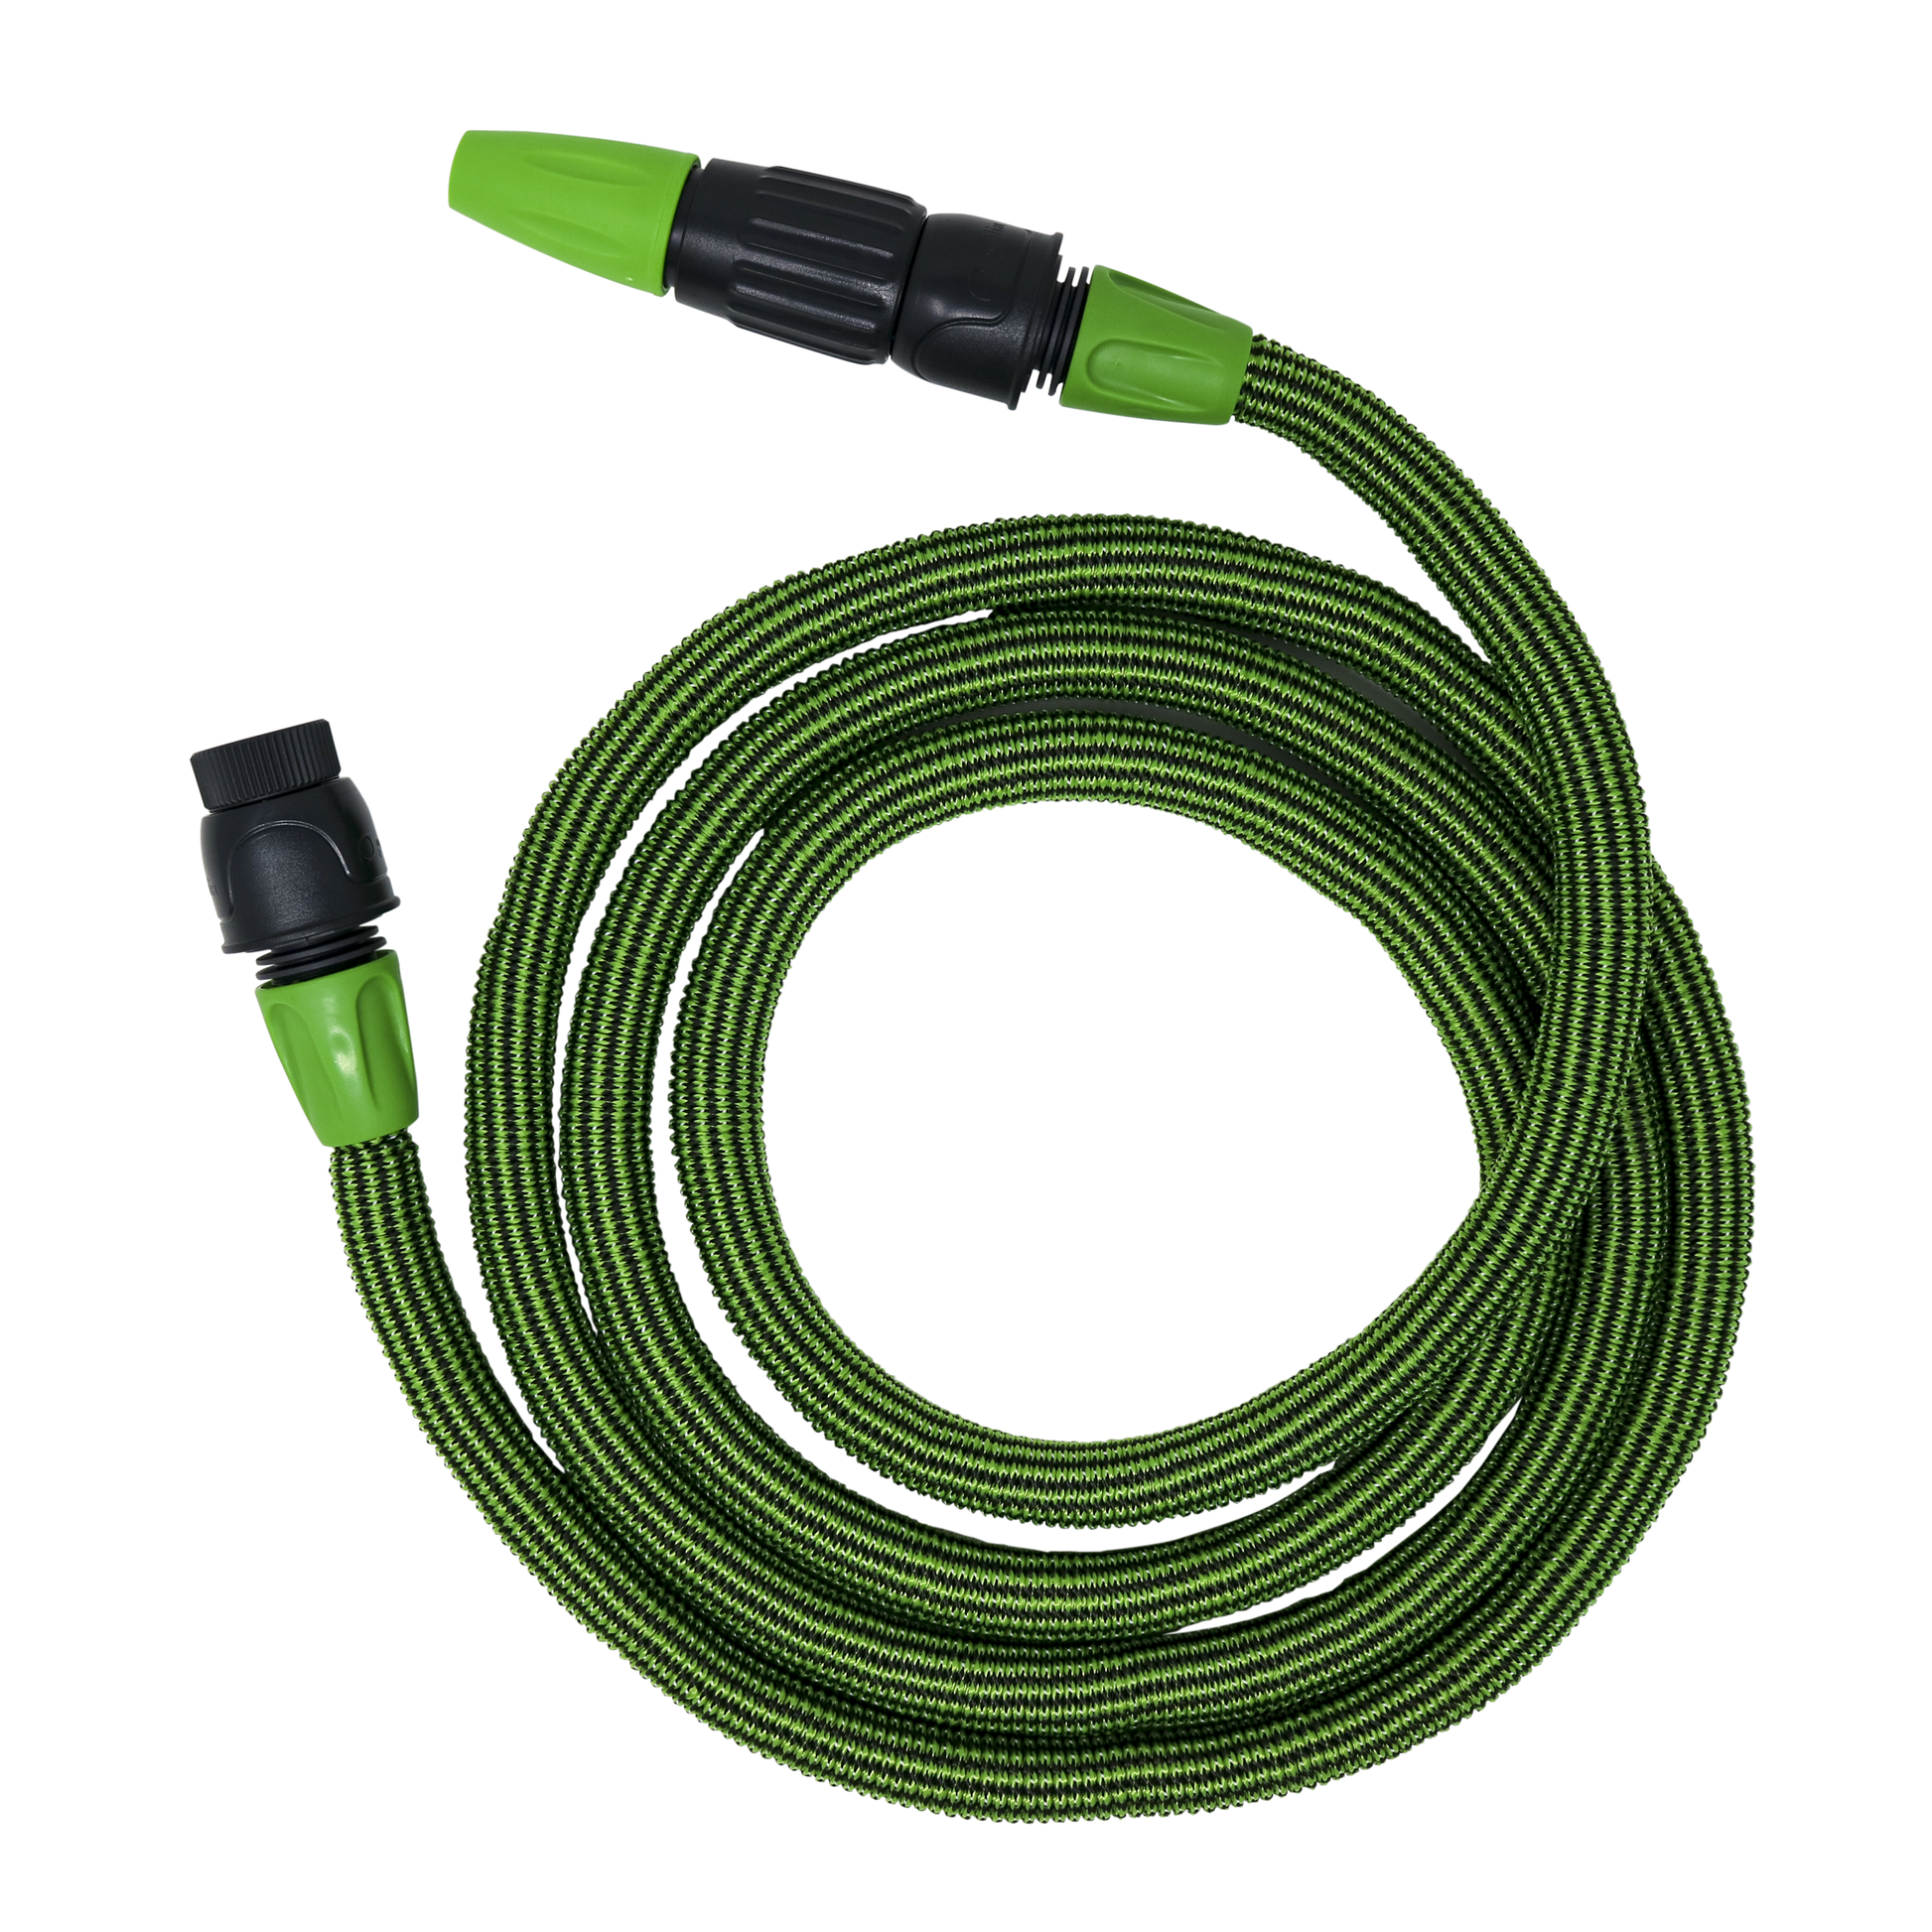 GEOLIA FABRIC EXTENSION HOSE 15M WITH 3JET COMPACT LANCE